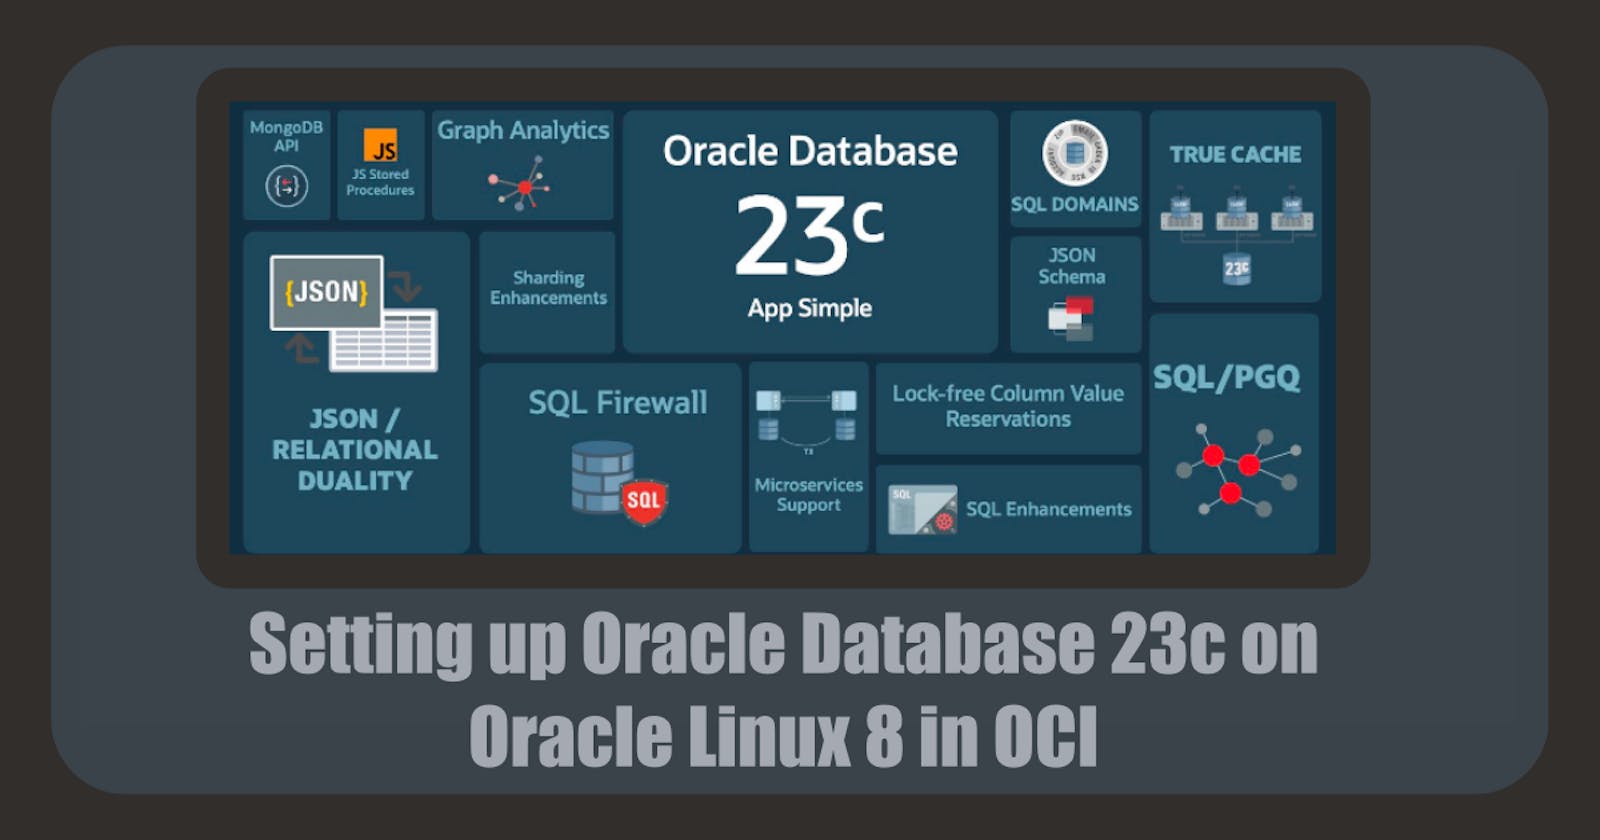 Setting up Oracle Database 23c on Oracle Linux 8 in OCI